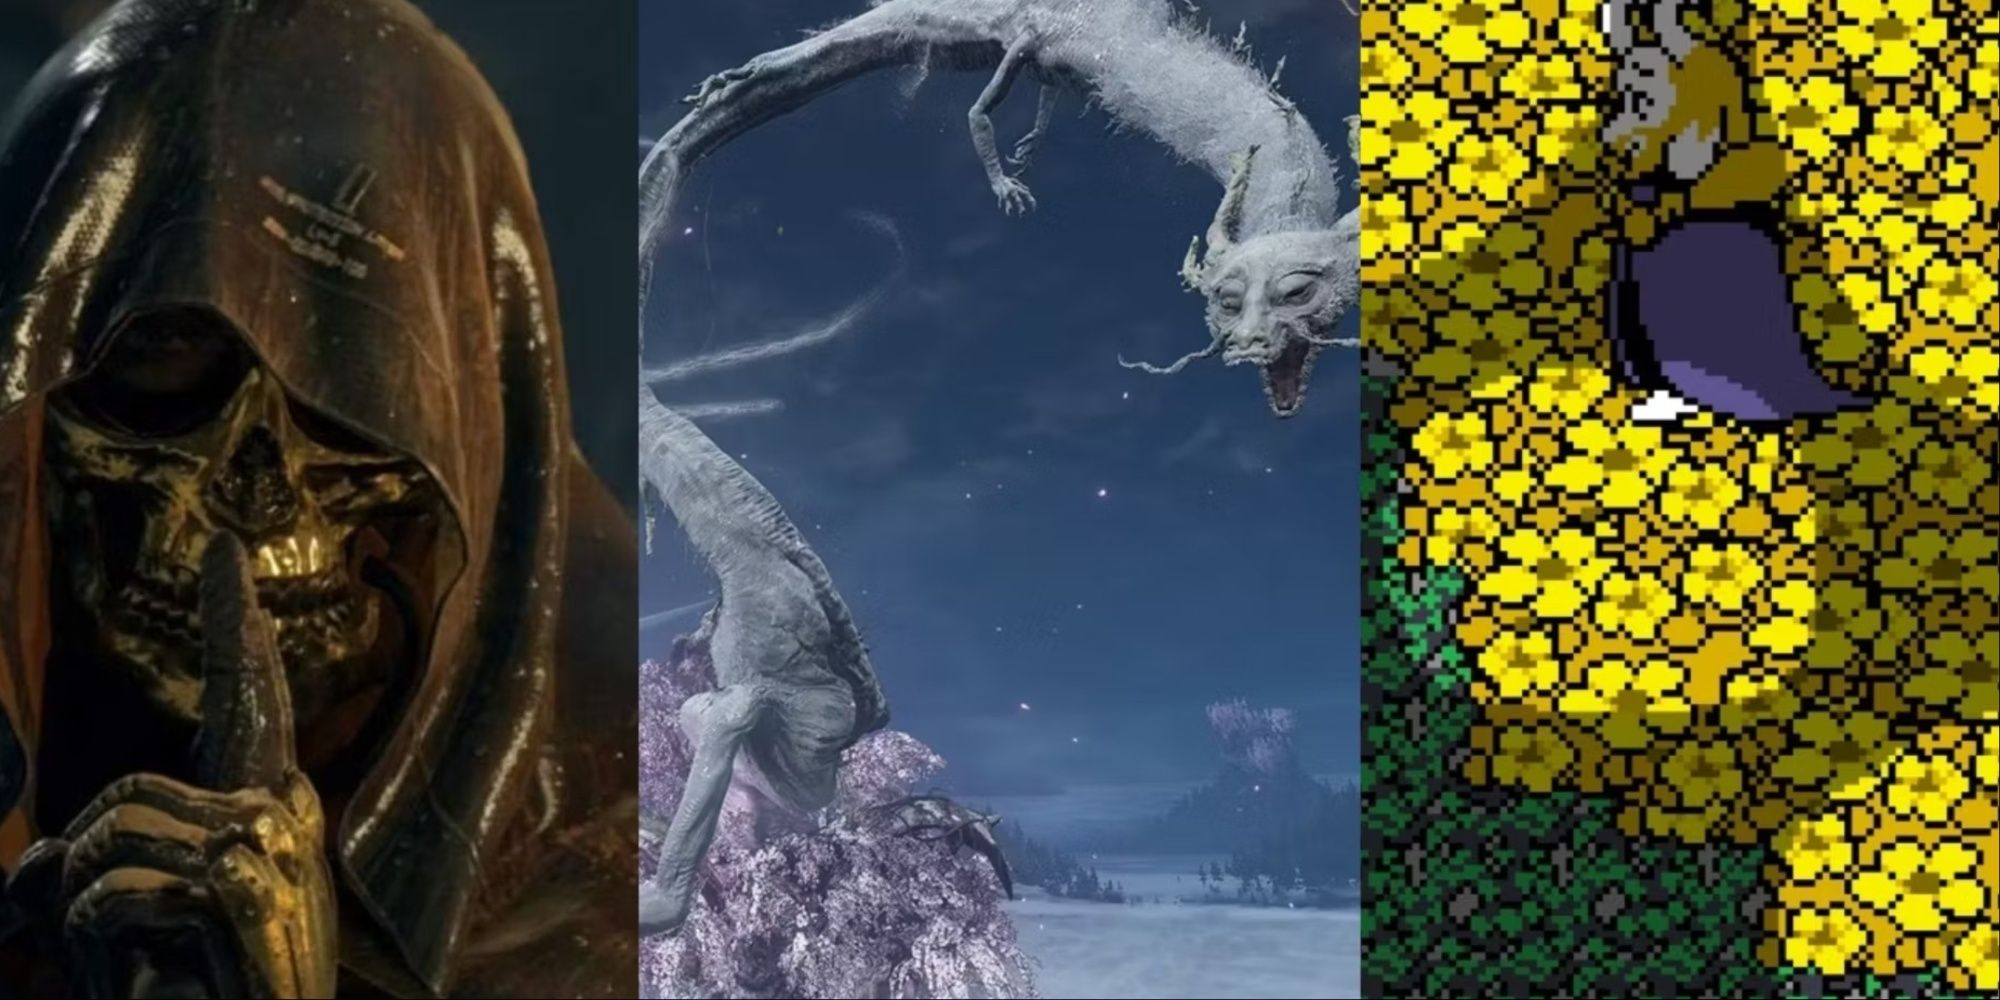 Higgs from Death stranding with a finger held up to his gold mask, the divine dragon from Sekiro roaring, and Asgore in a field of flowers from undertale, left to right